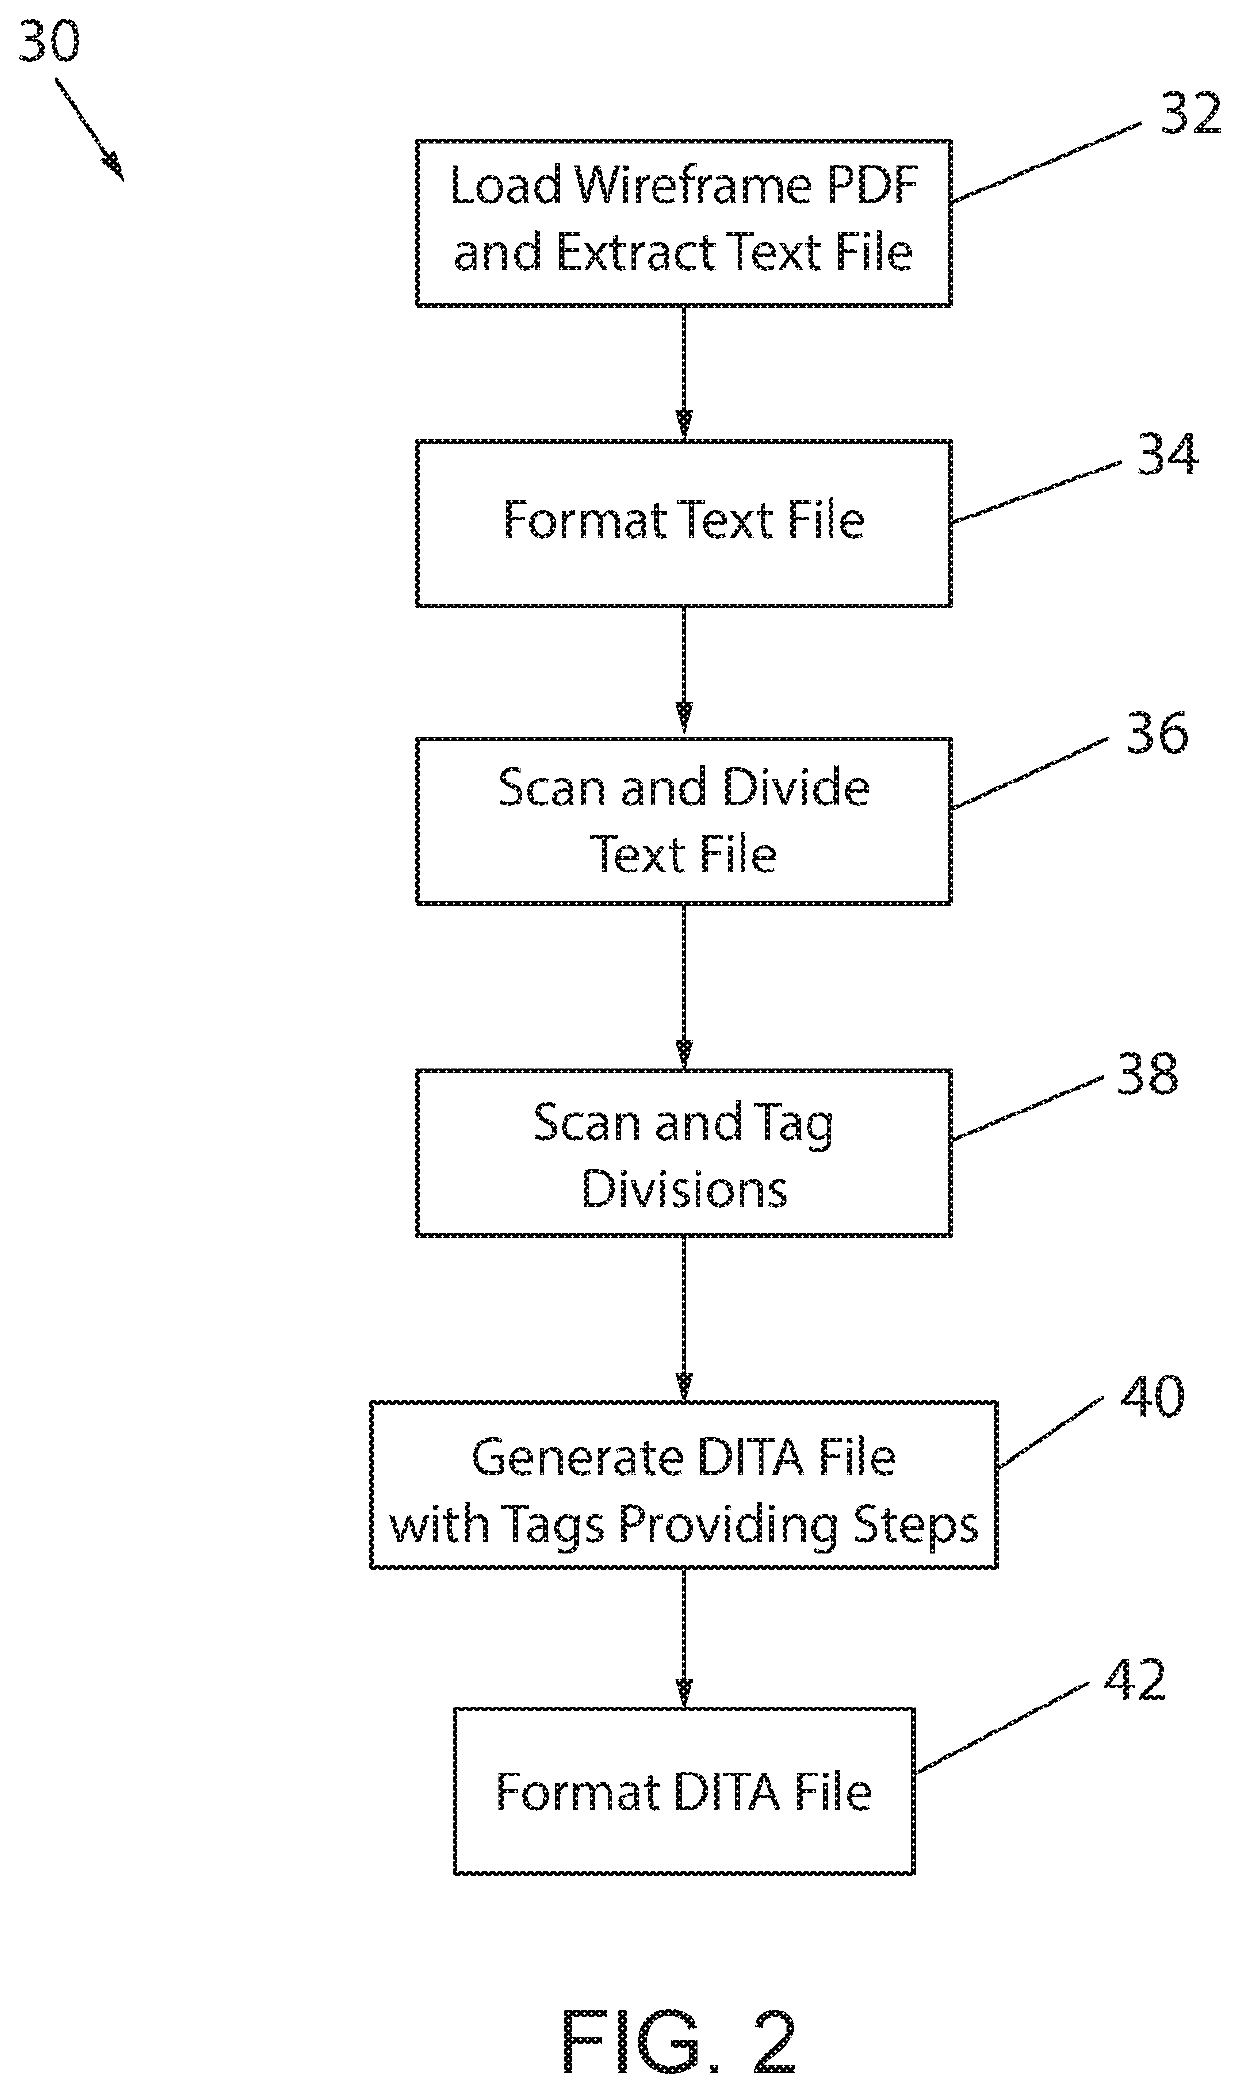 Document Production by Conversion from Wireframe to Darwin Information Typing Architecture (DITA)